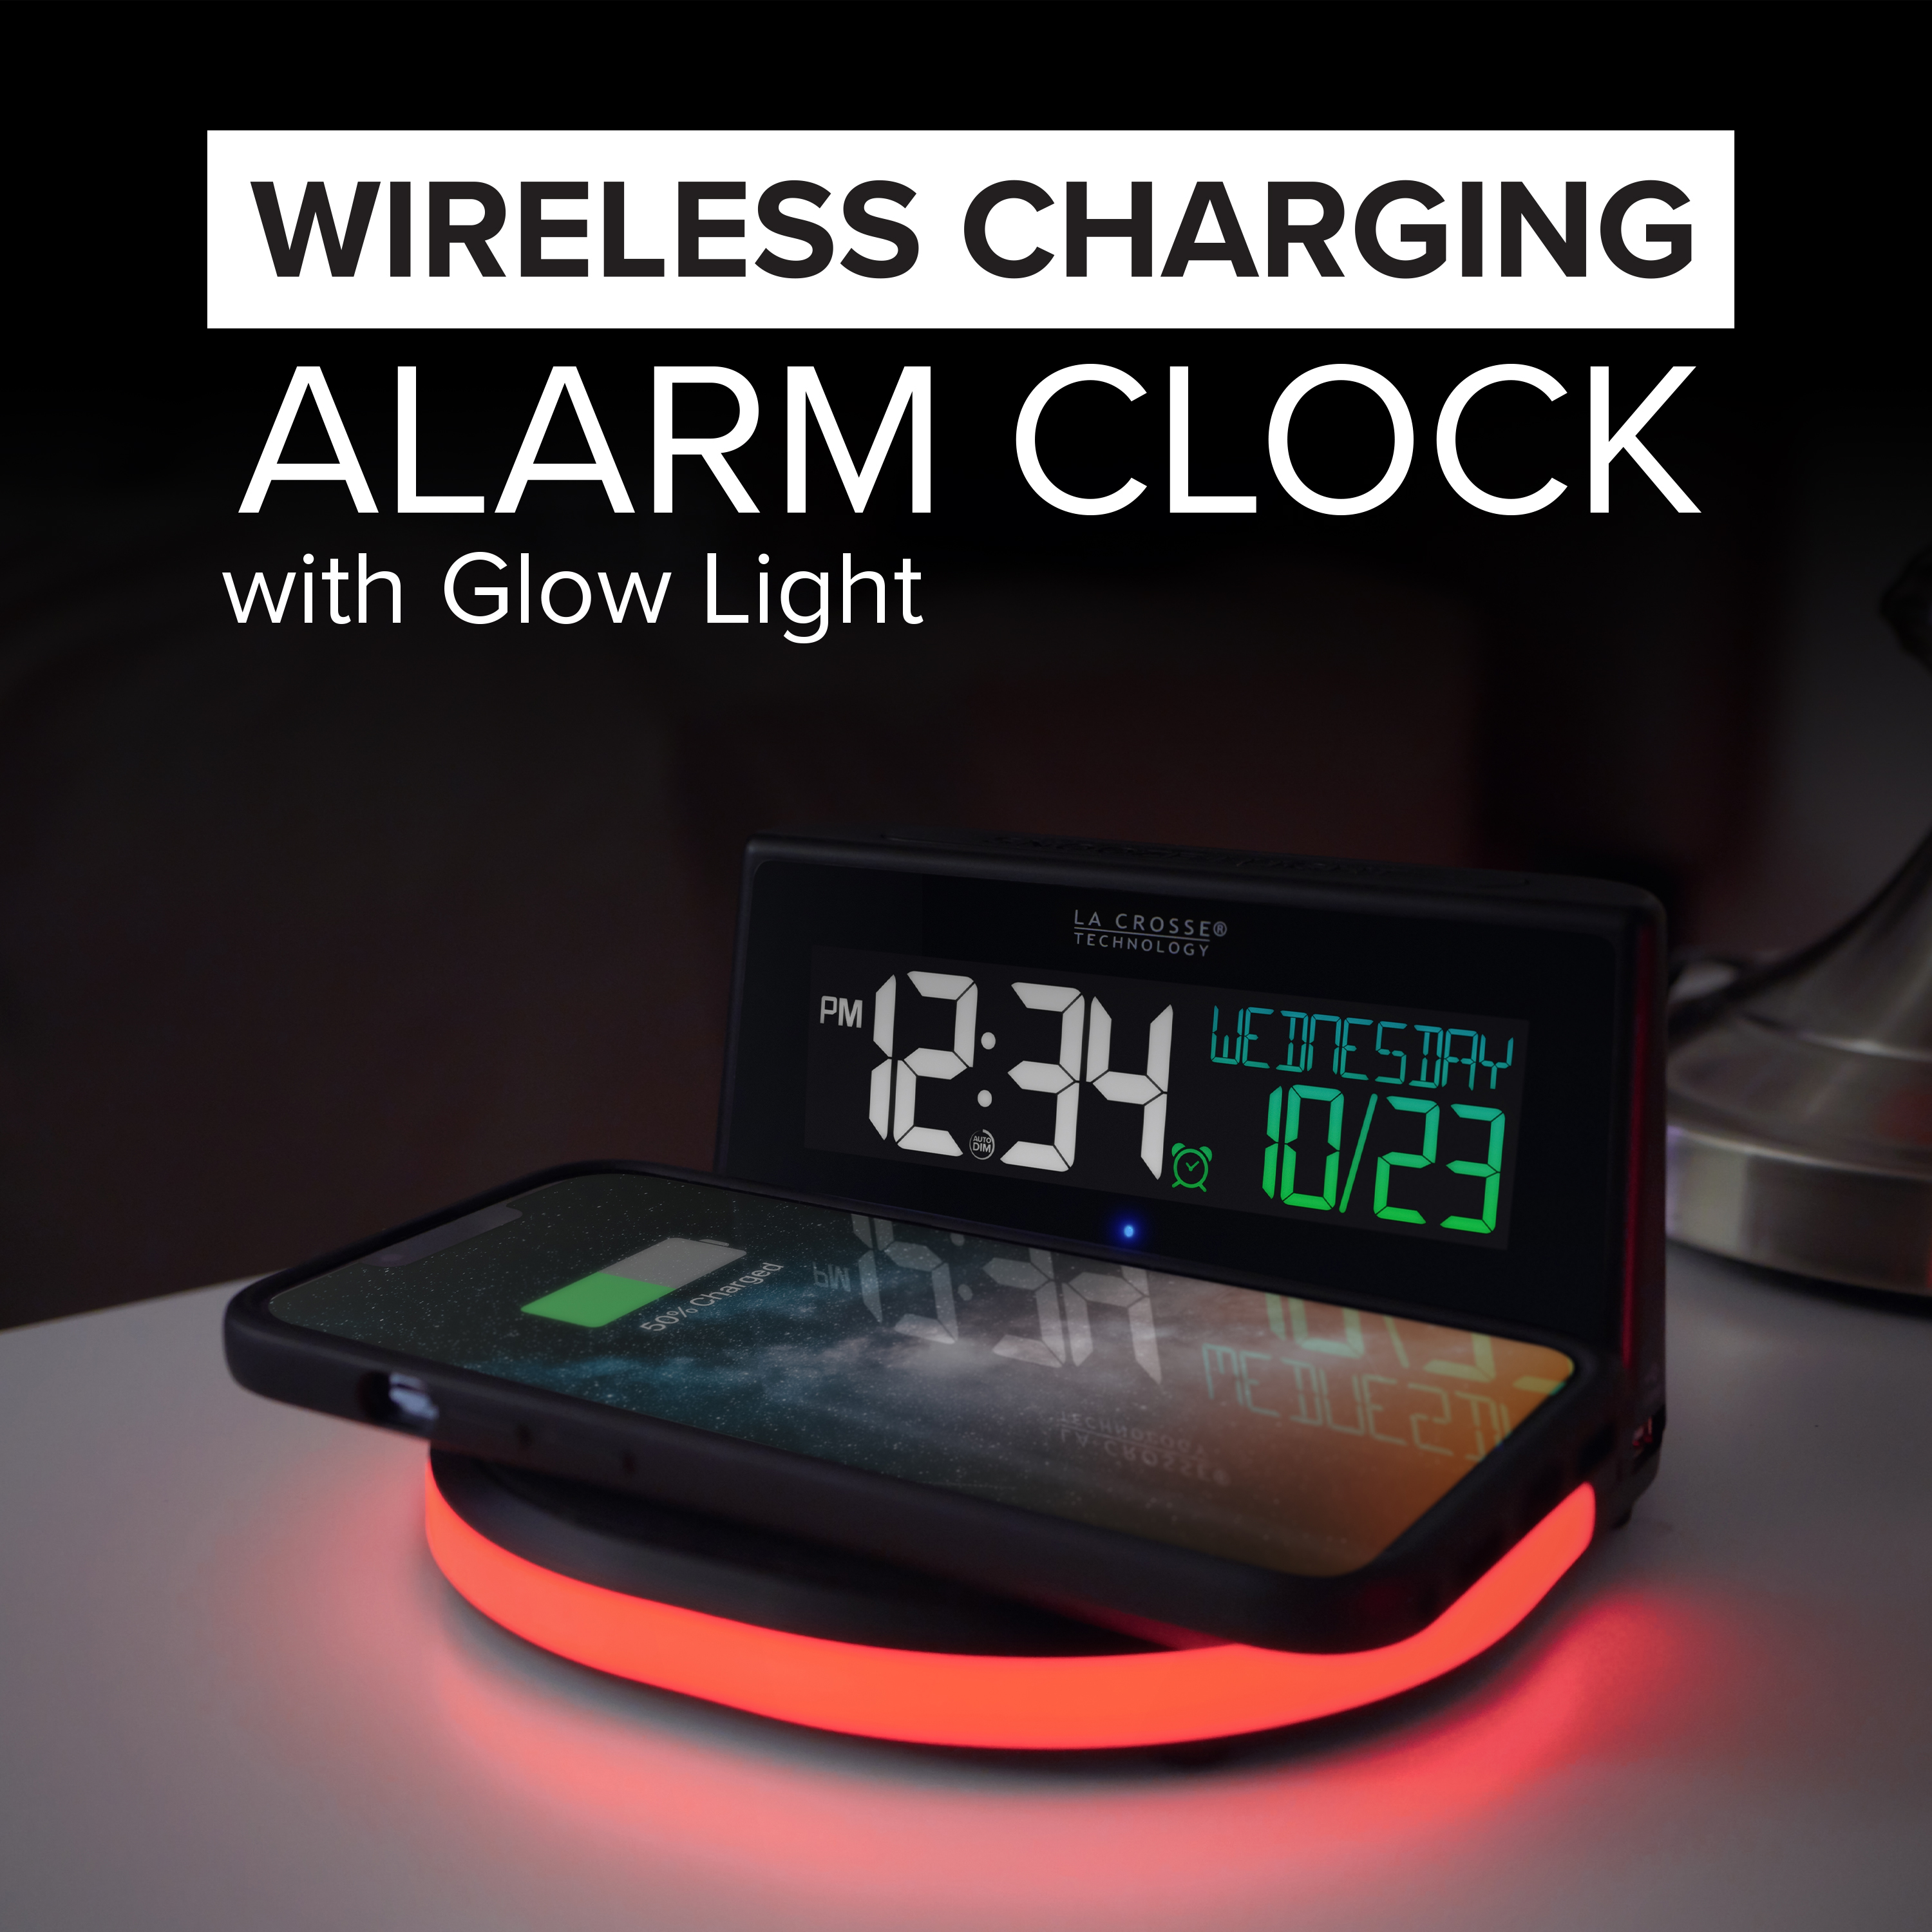 La Crosse Technology Wireless Charging Alarm Black LCD Clock with Glowing Lighted Base, 617-148 - image 4 of 13